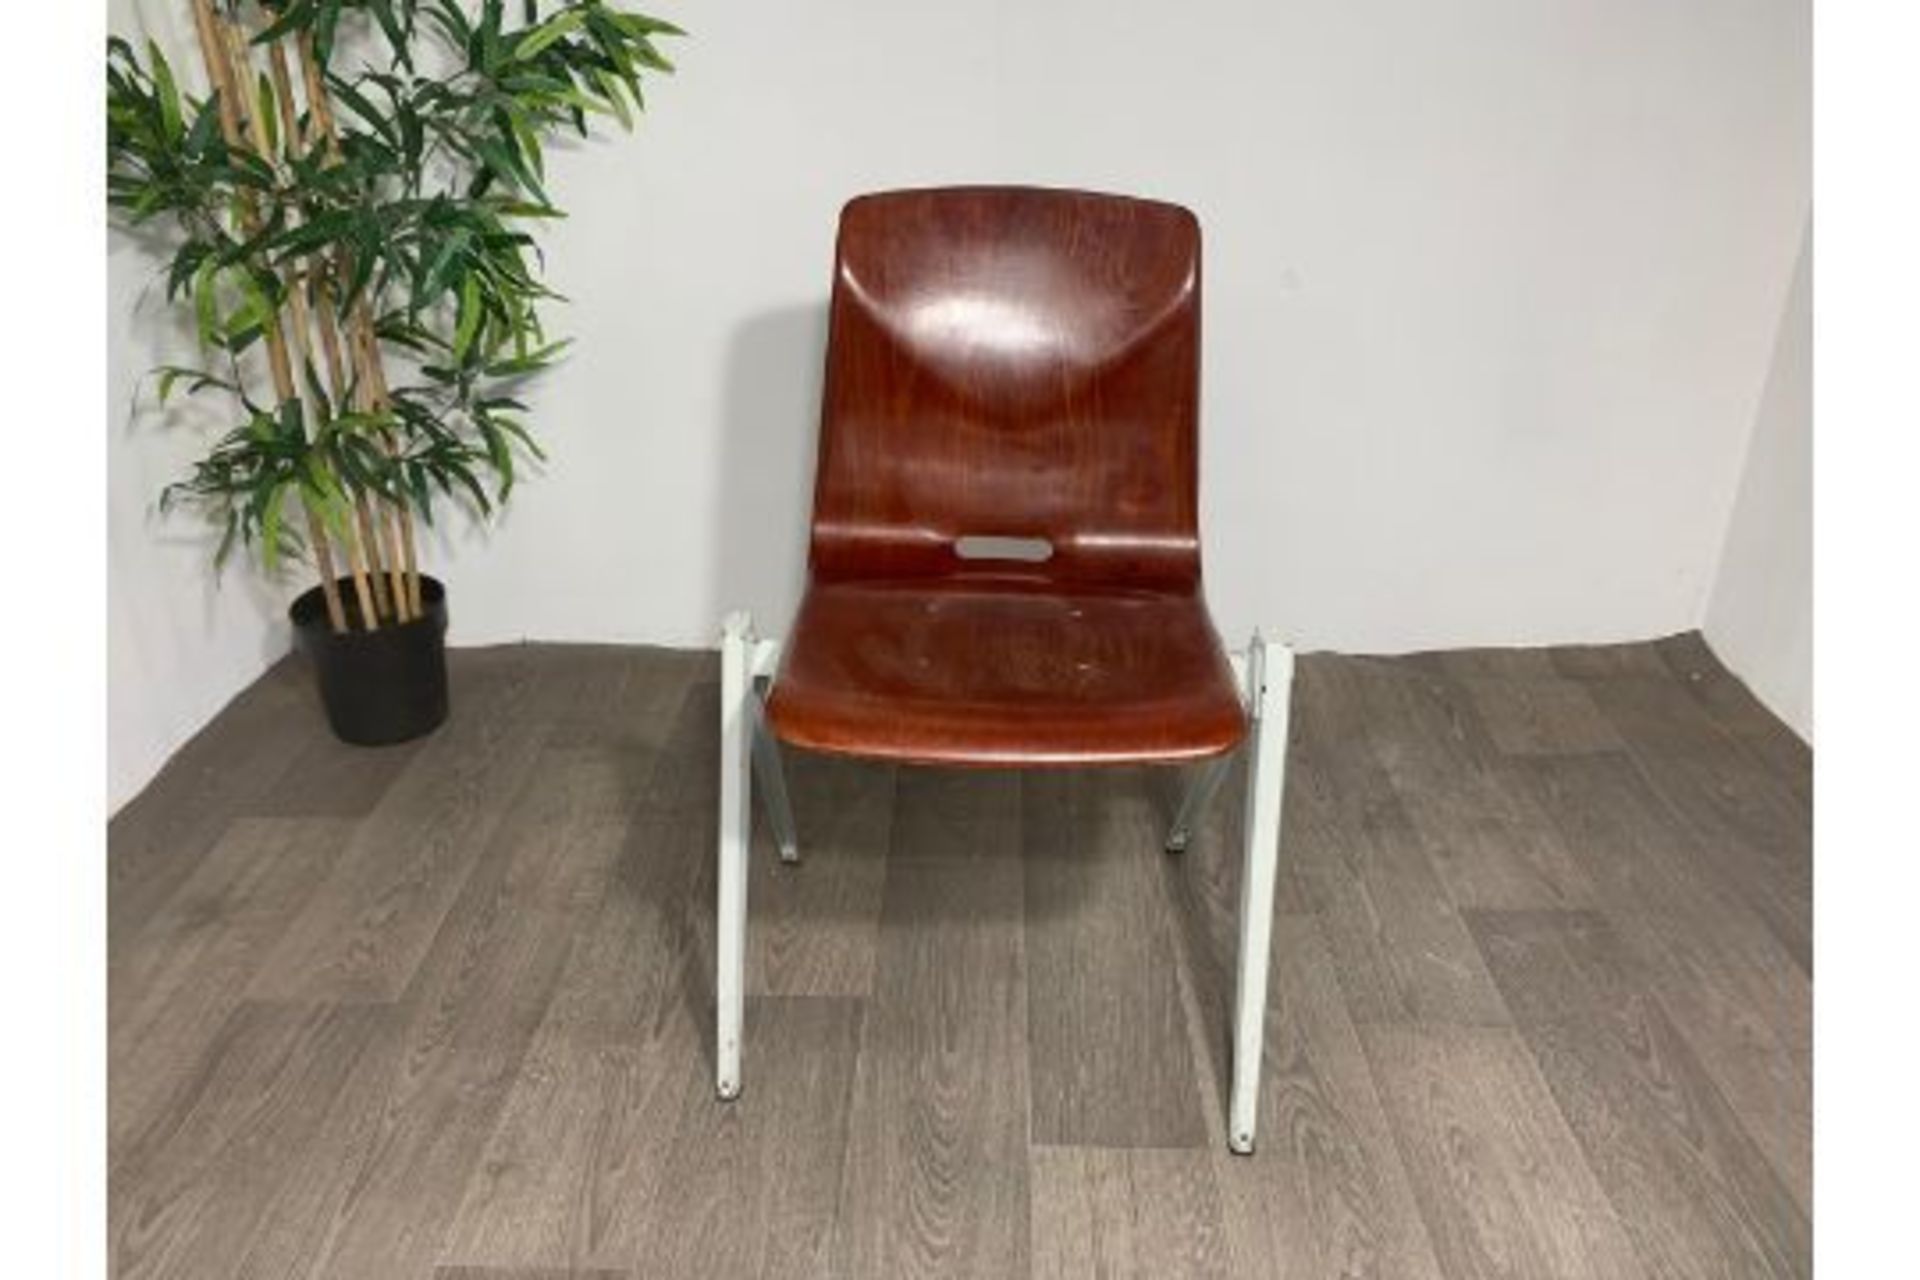 Thur Op Seat Stack-able Chair in mahogany resin x2